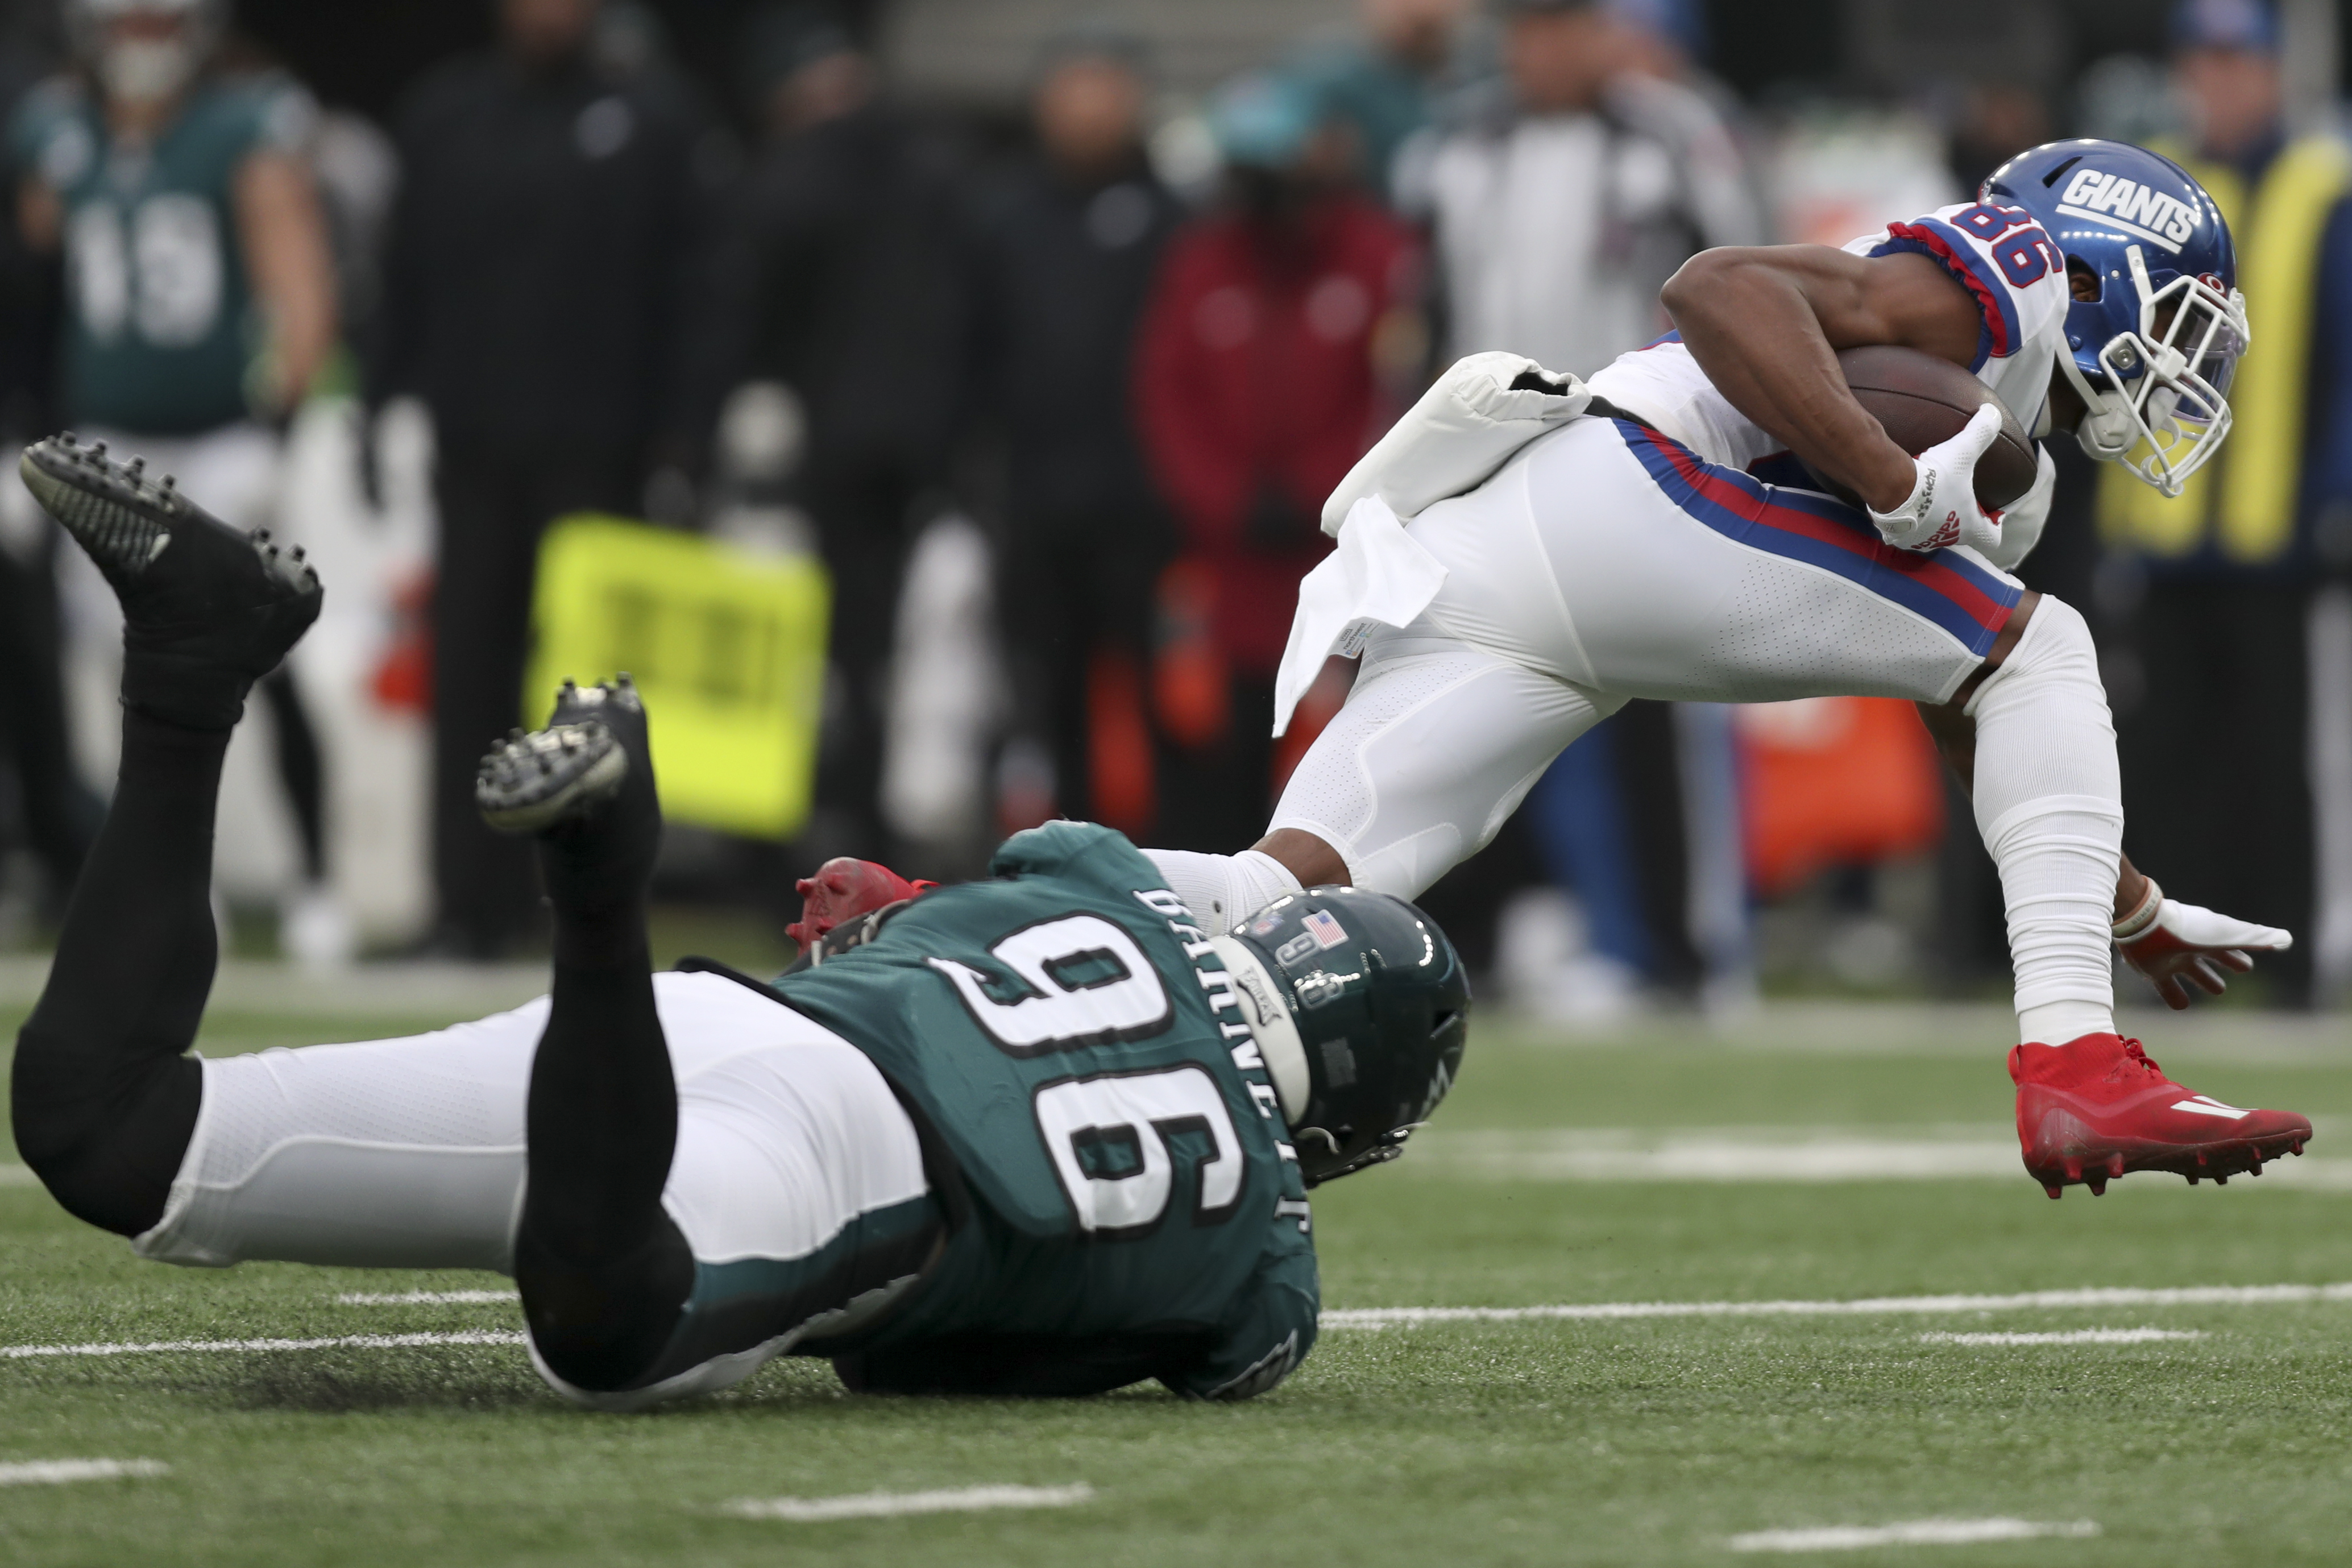 Eagles vs. Giants: Analysis as Jalen Hurts leads playoff rout vs Giants